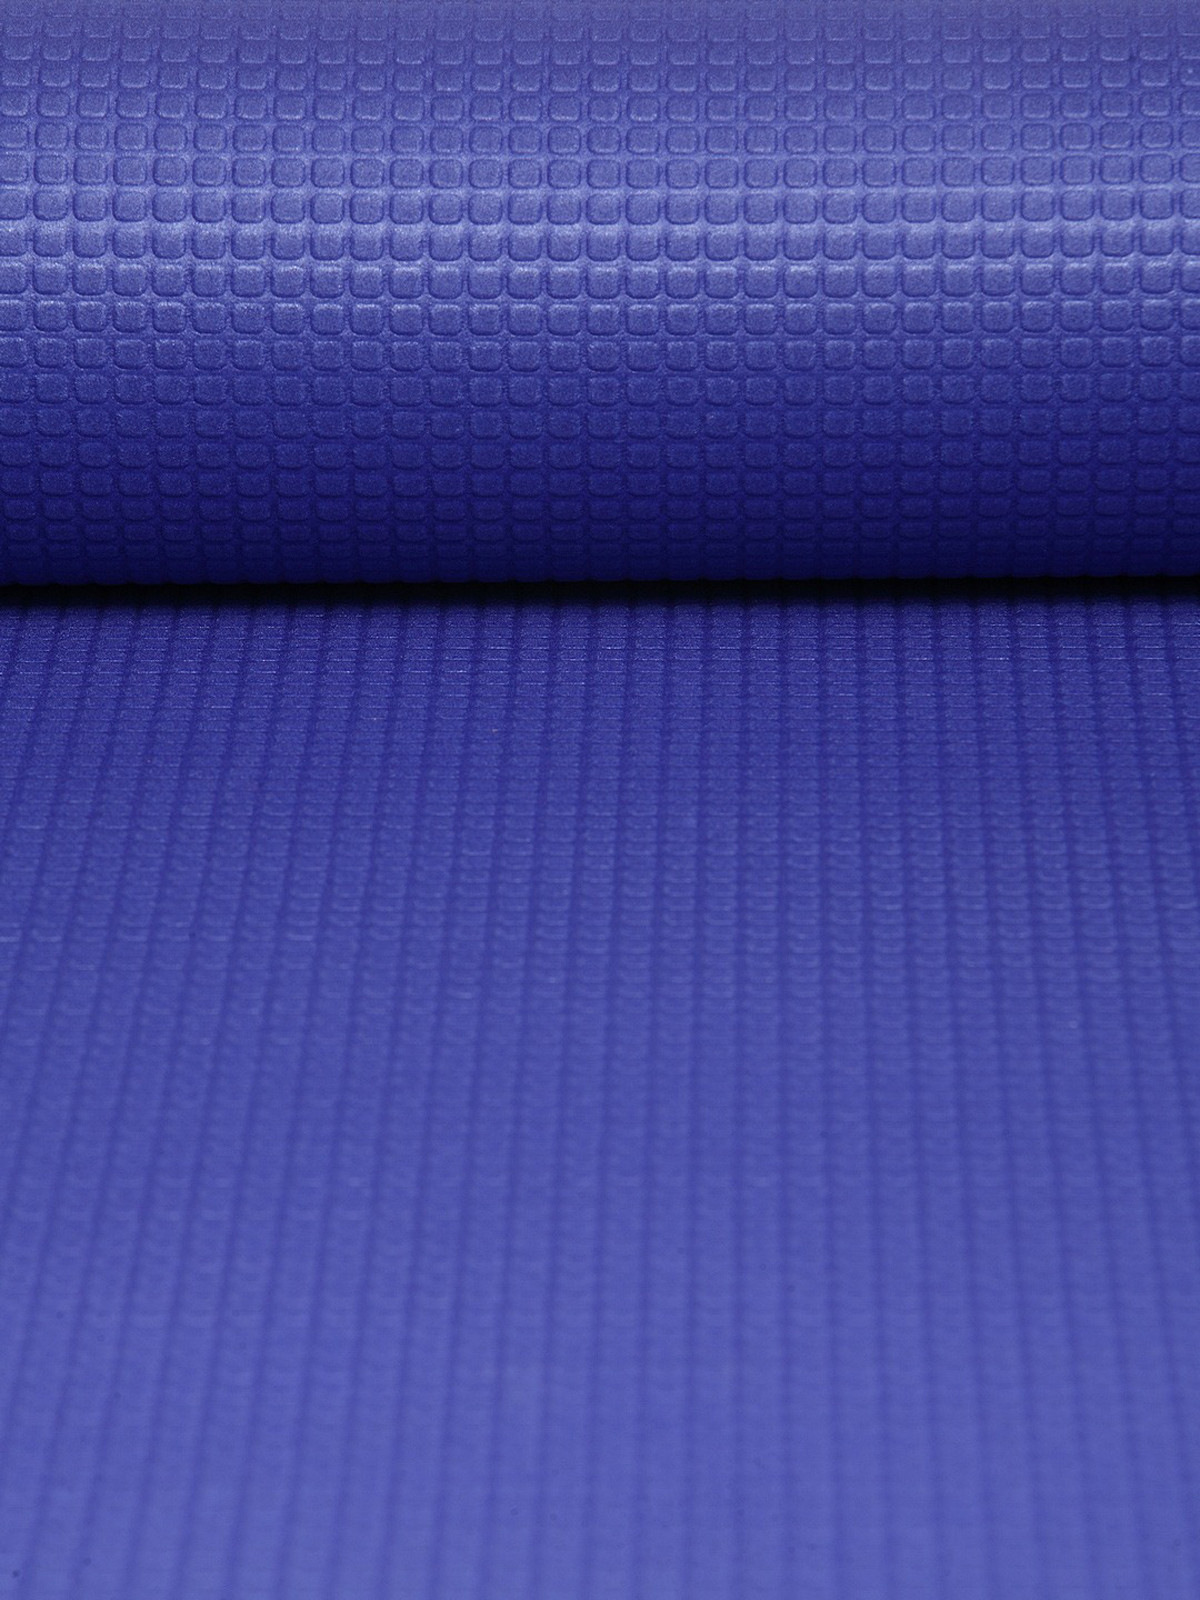 Kuber Industries 4 MM Extra Thick Yoga mat for Gym Workout and Flooring Exercise Long Size Yoga Mat for Men and Women, 6 x 2 Feet (Royal Blue)-33_S_KUBQMART11582